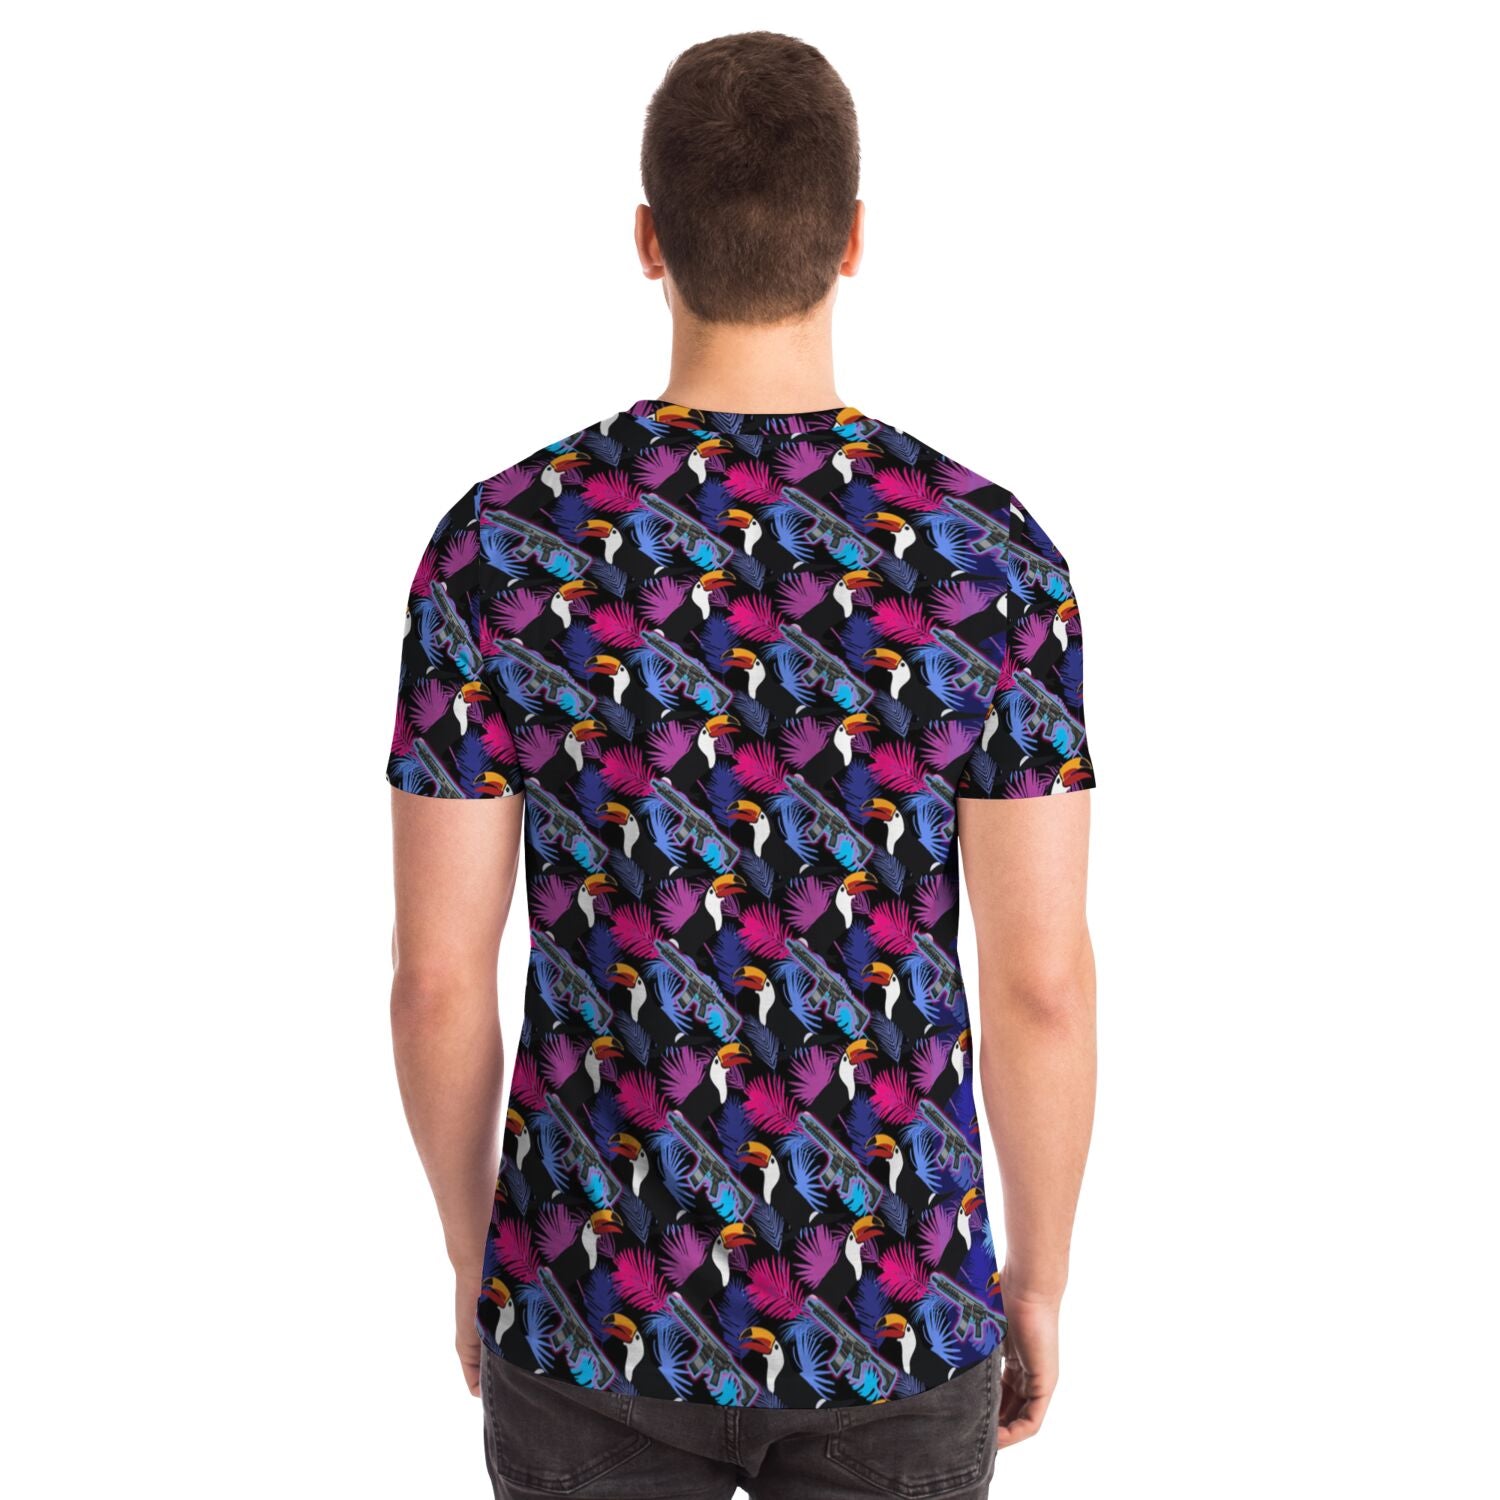 Rad Palm Toucan Attack T-Shirt